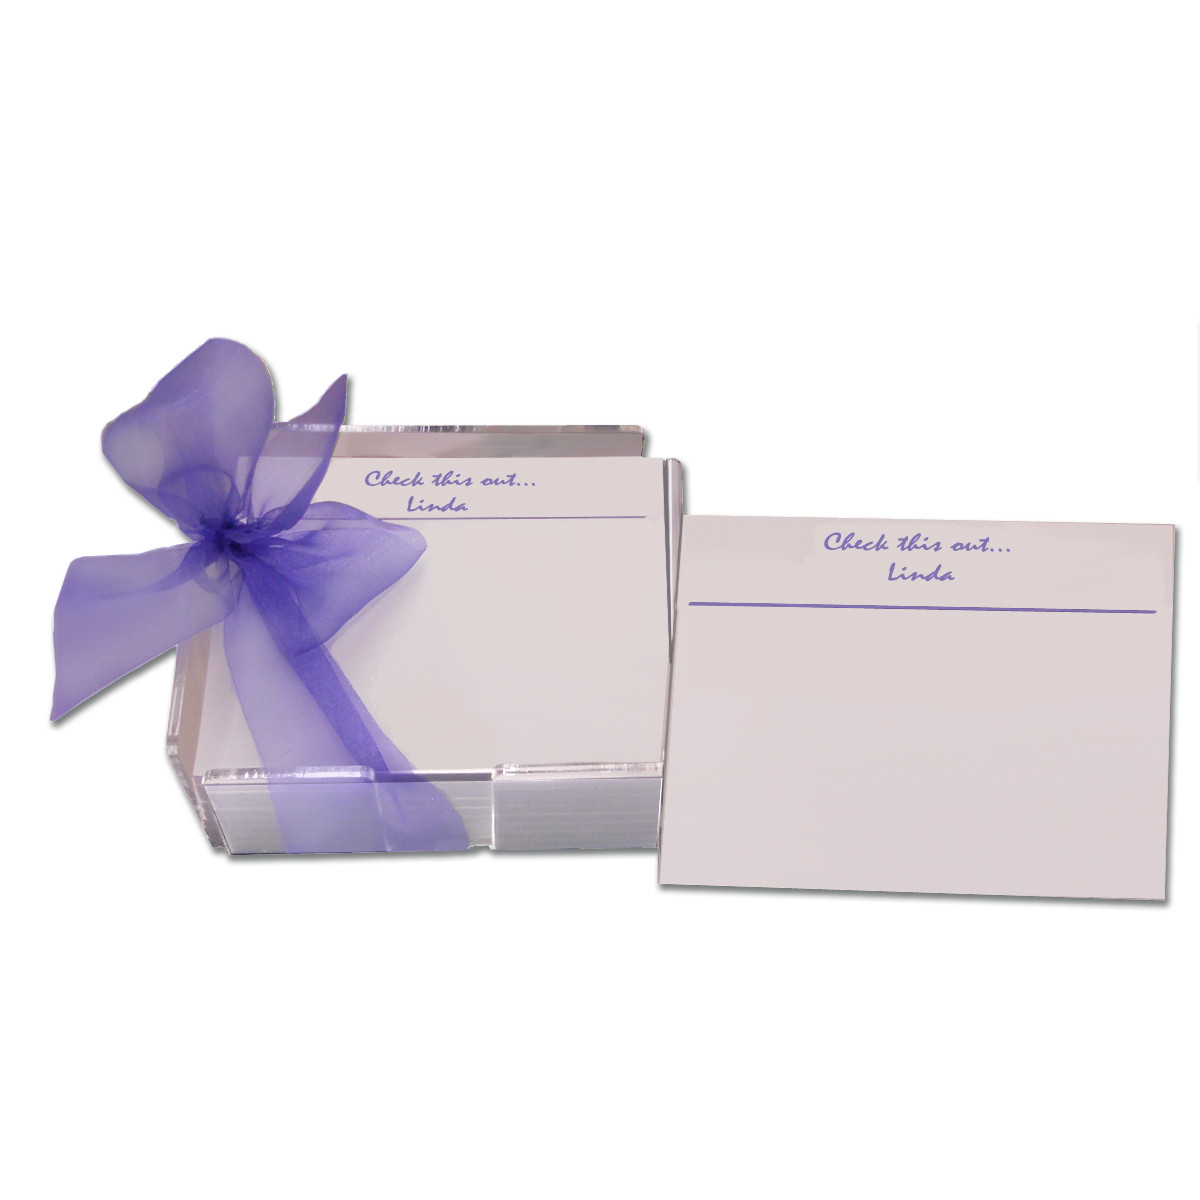 Personalized post-it note set printed with recipients name and presented in an acrylic holder